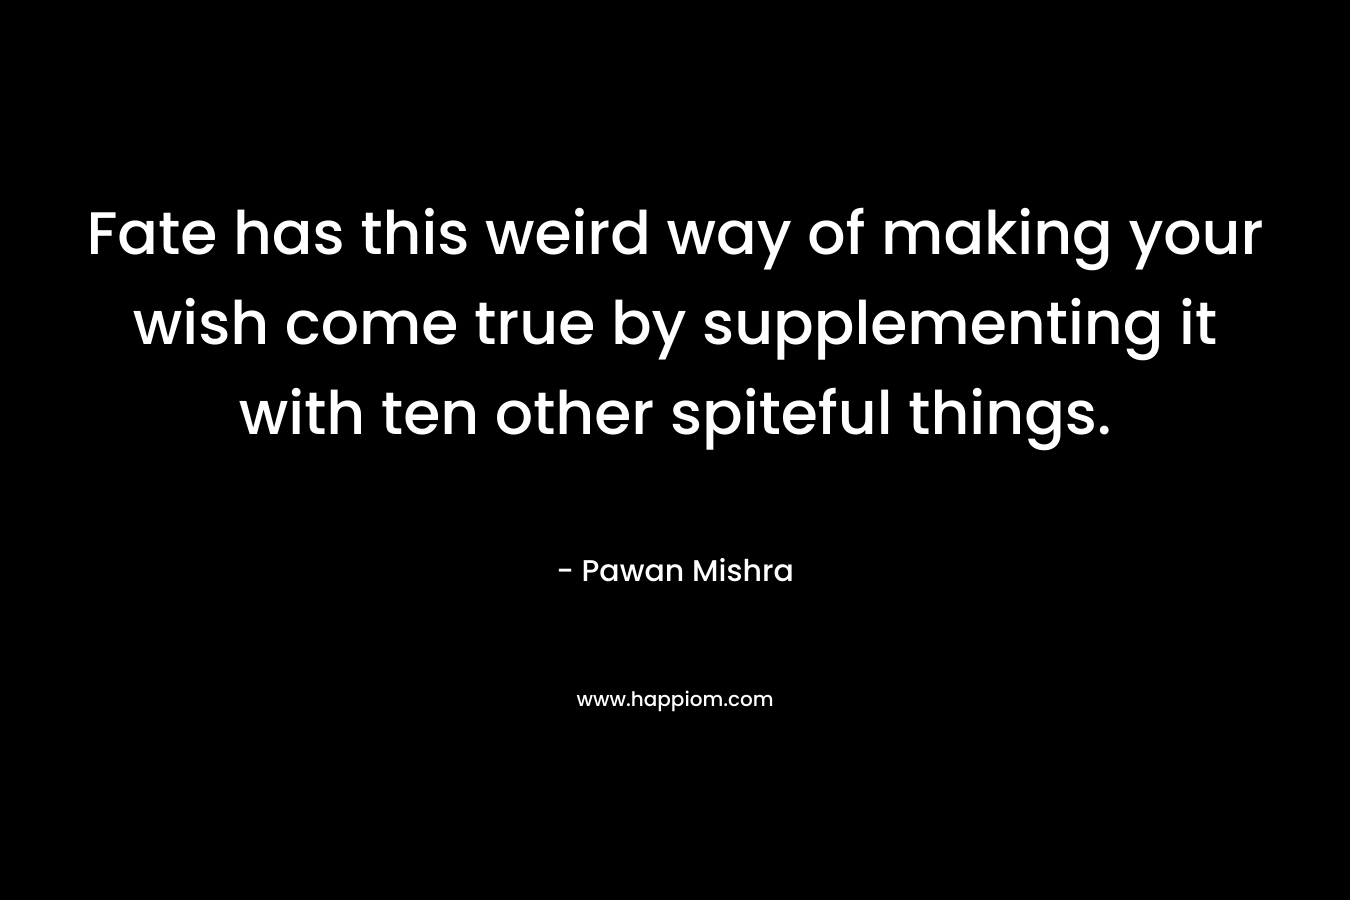 Fate has this weird way of making your wish come true by supplementing it with ten other spiteful things. – Pawan Mishra